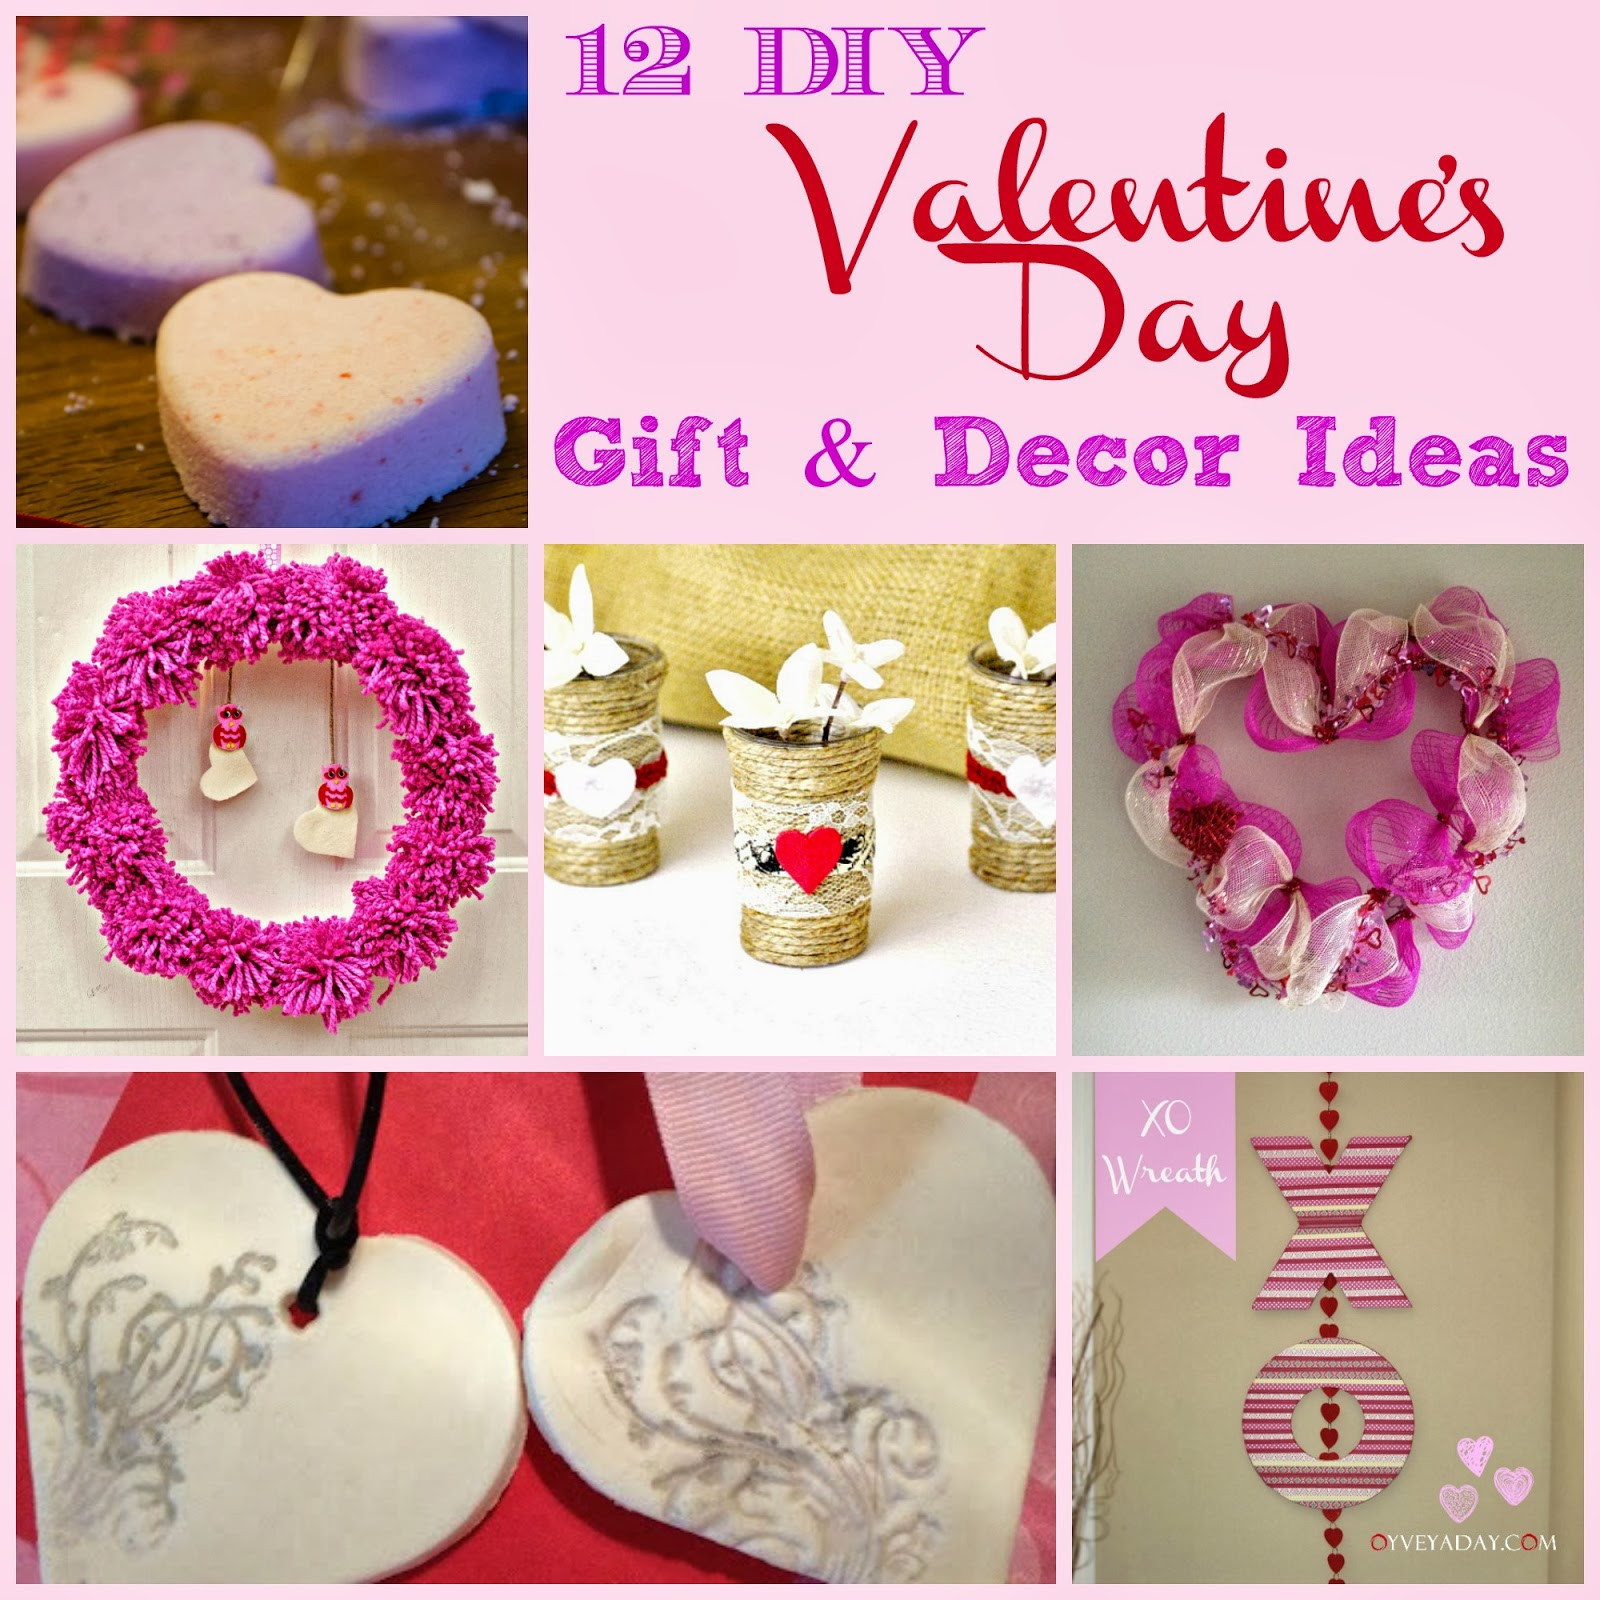 DIY Valentines Day Gift
 12 DIY Valentine s Day Gift & Decor Ideas Outnumbered 3 to 1